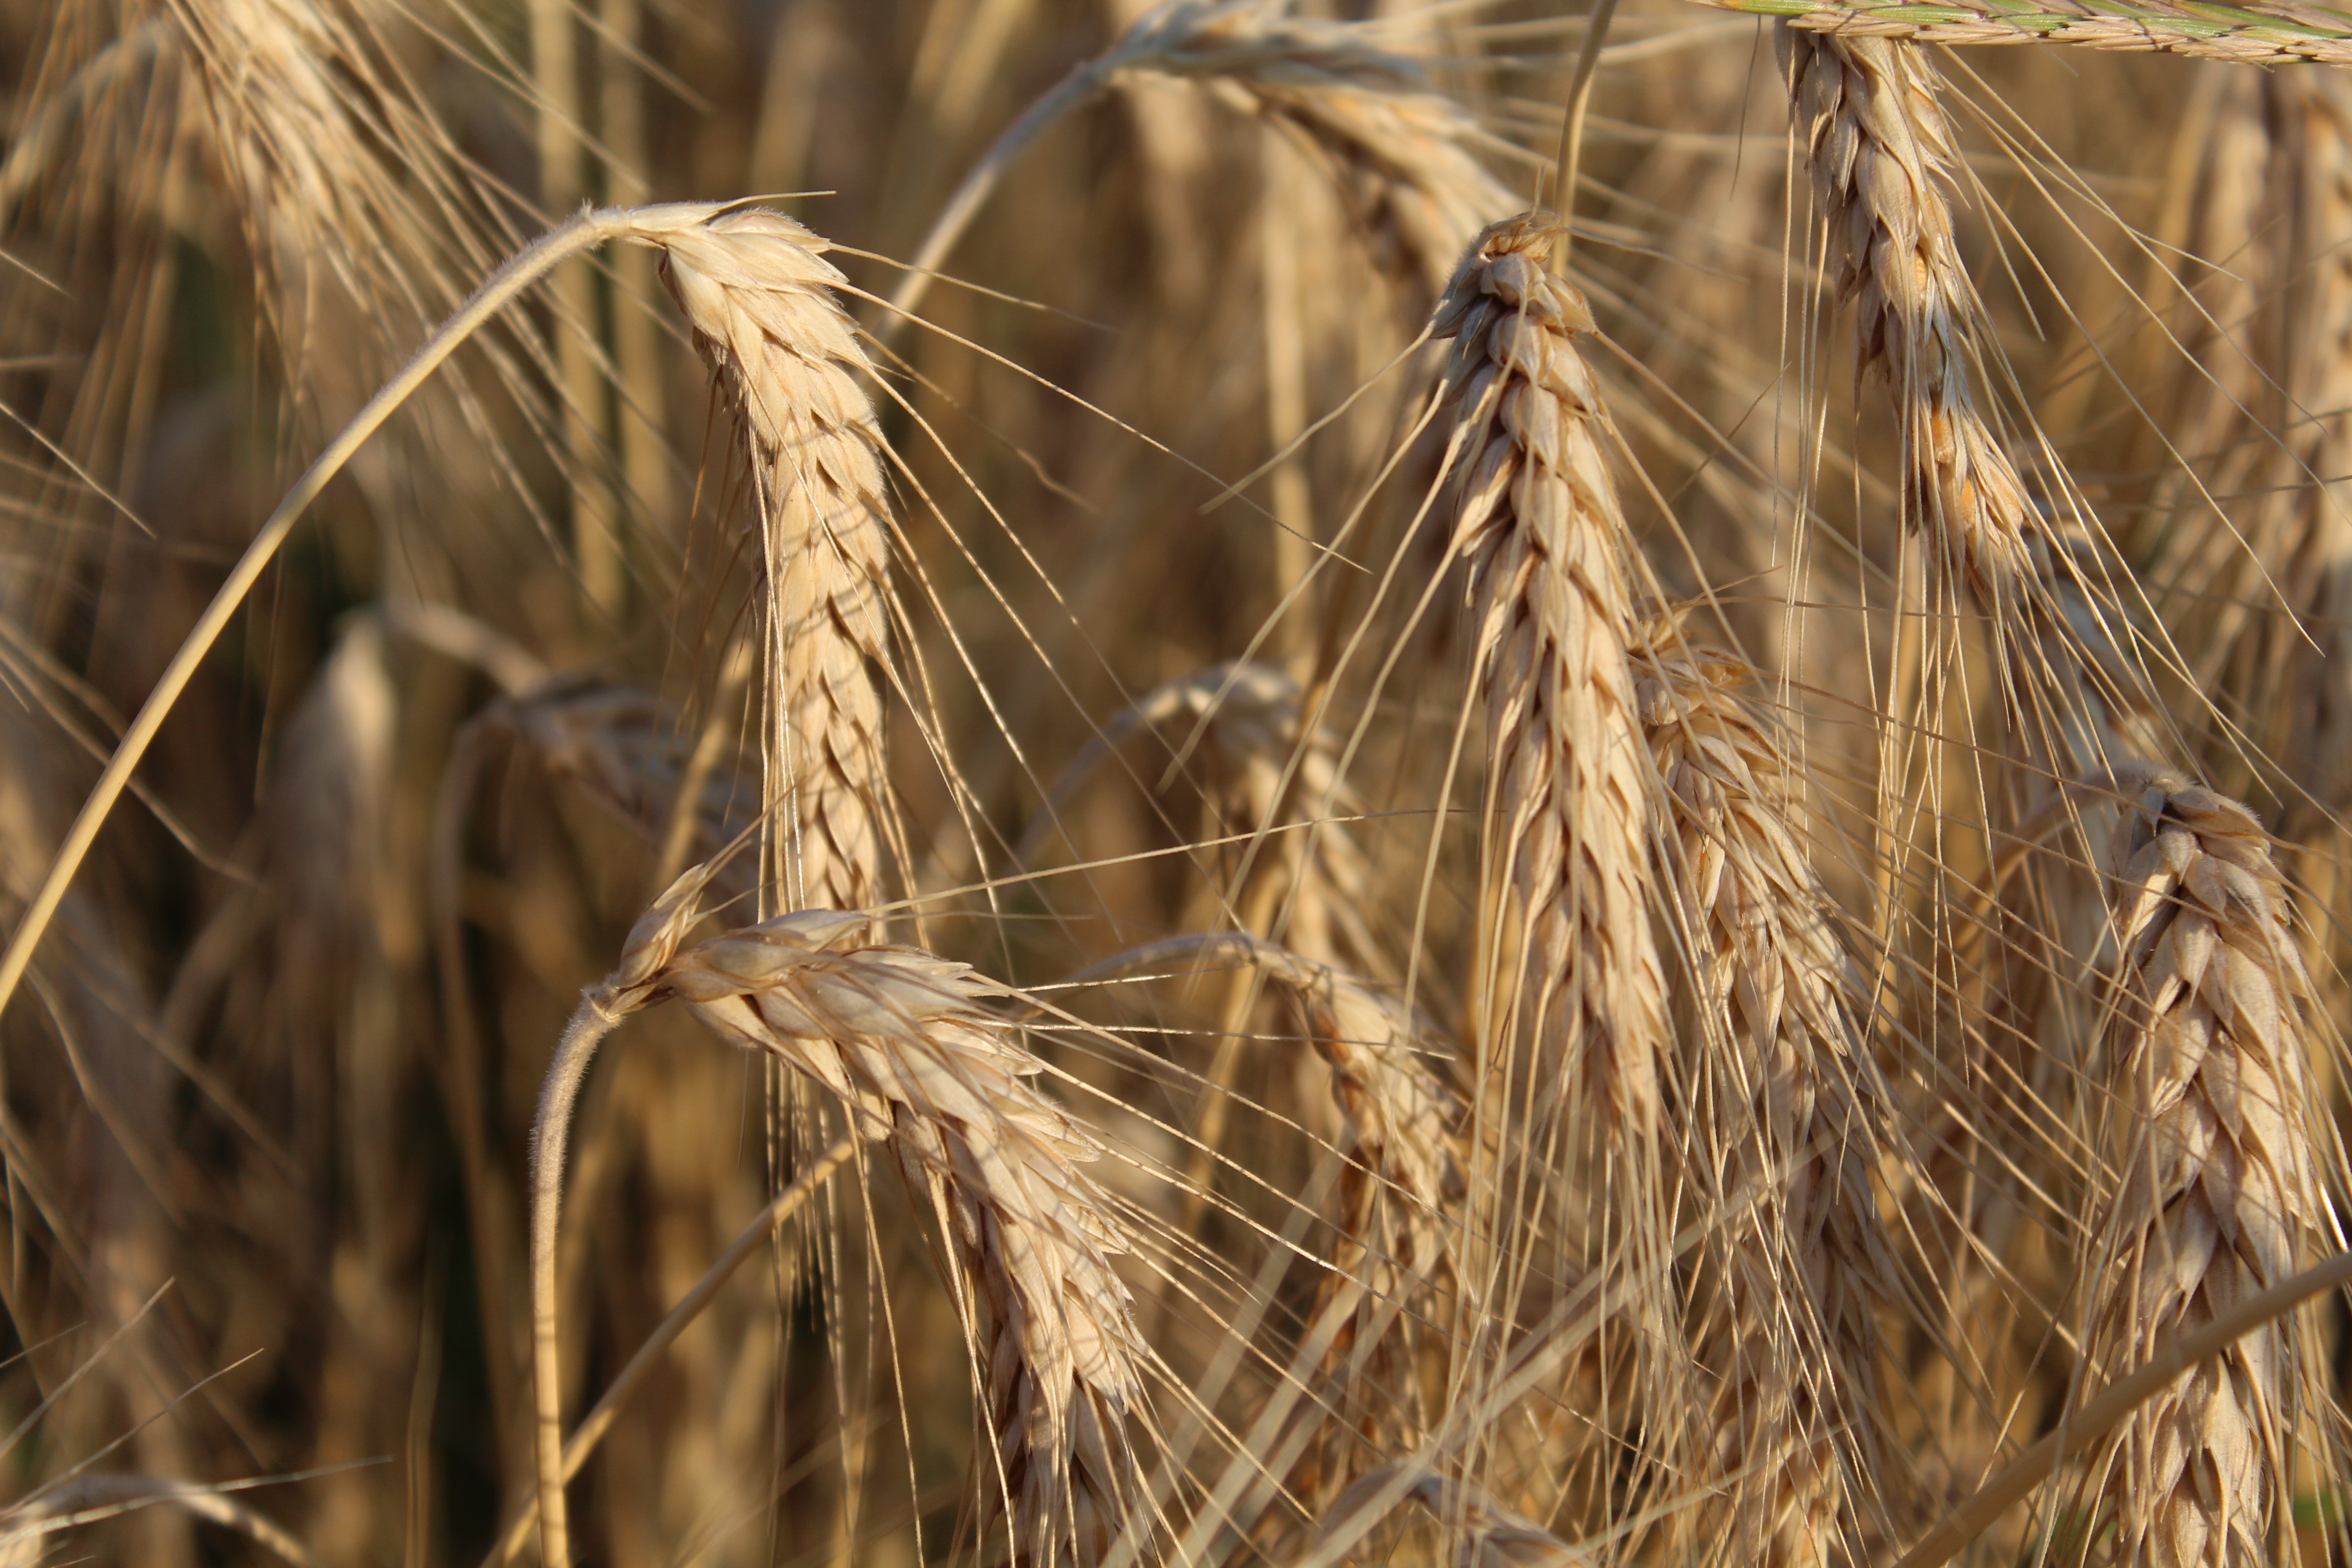 Ears, Flour, Agriculture, Wheat, cereal plant, agriculture